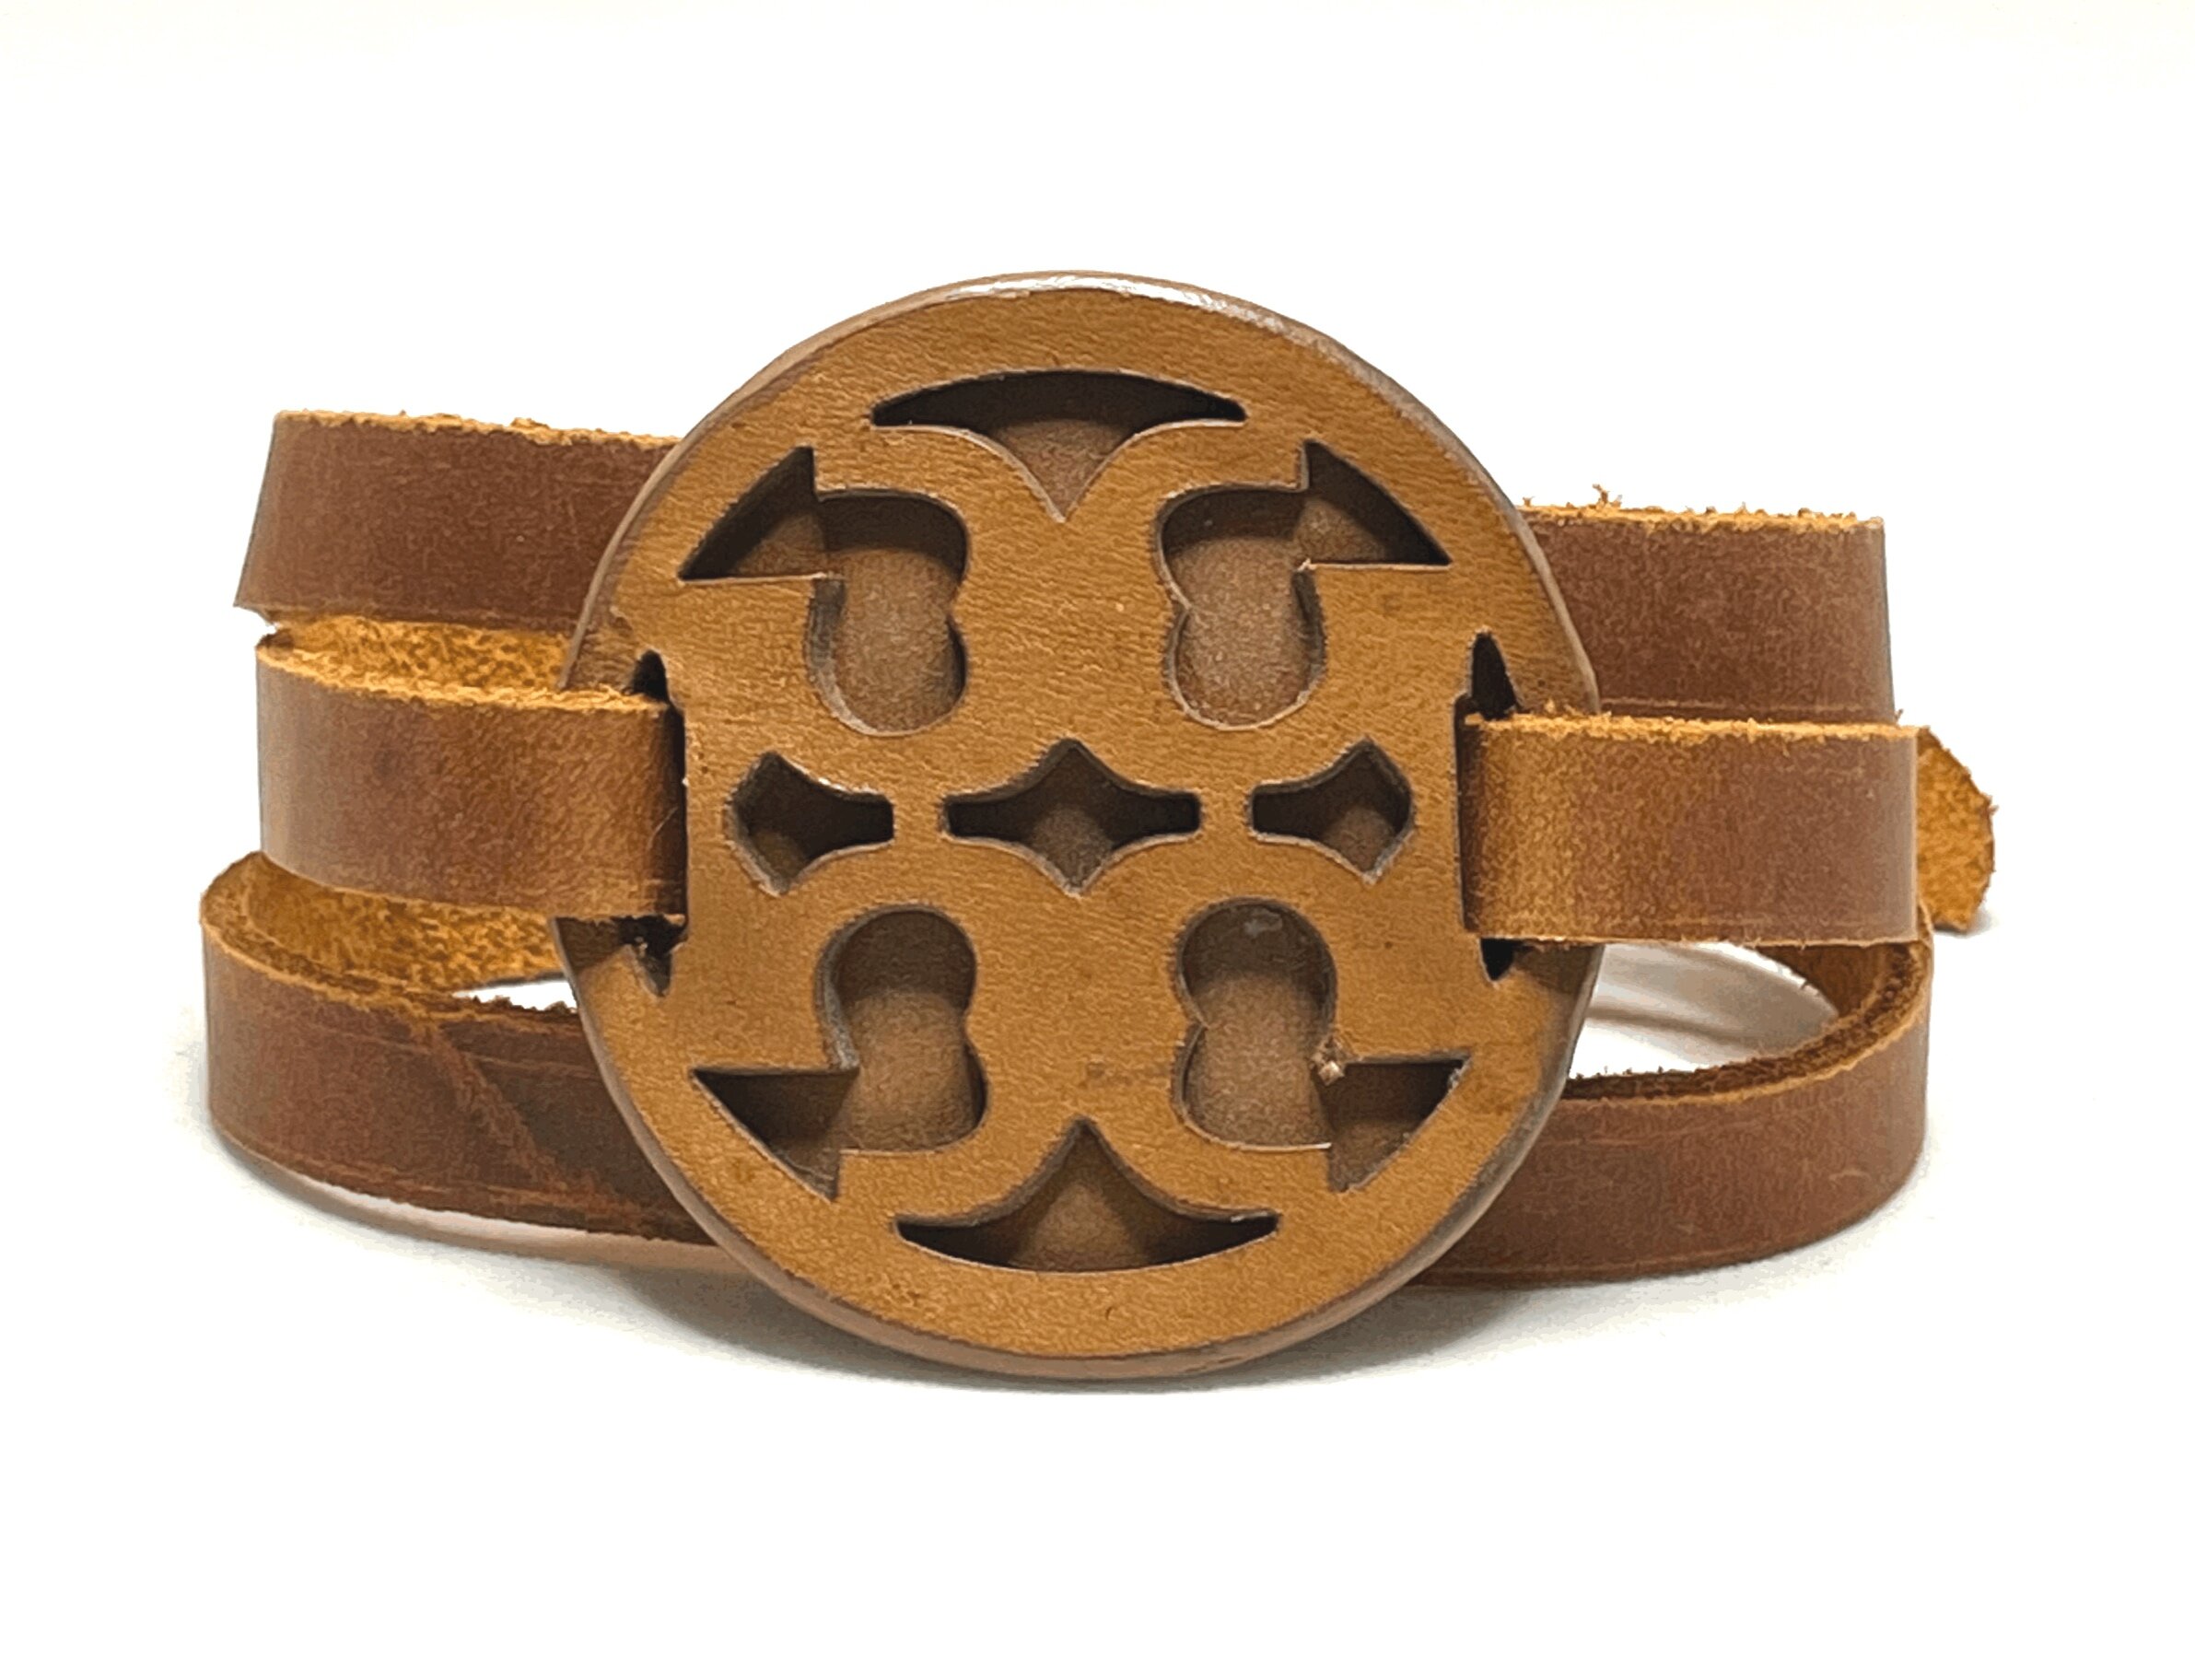 Leather Wrap Bracelet with Gold Hardware - The Revury